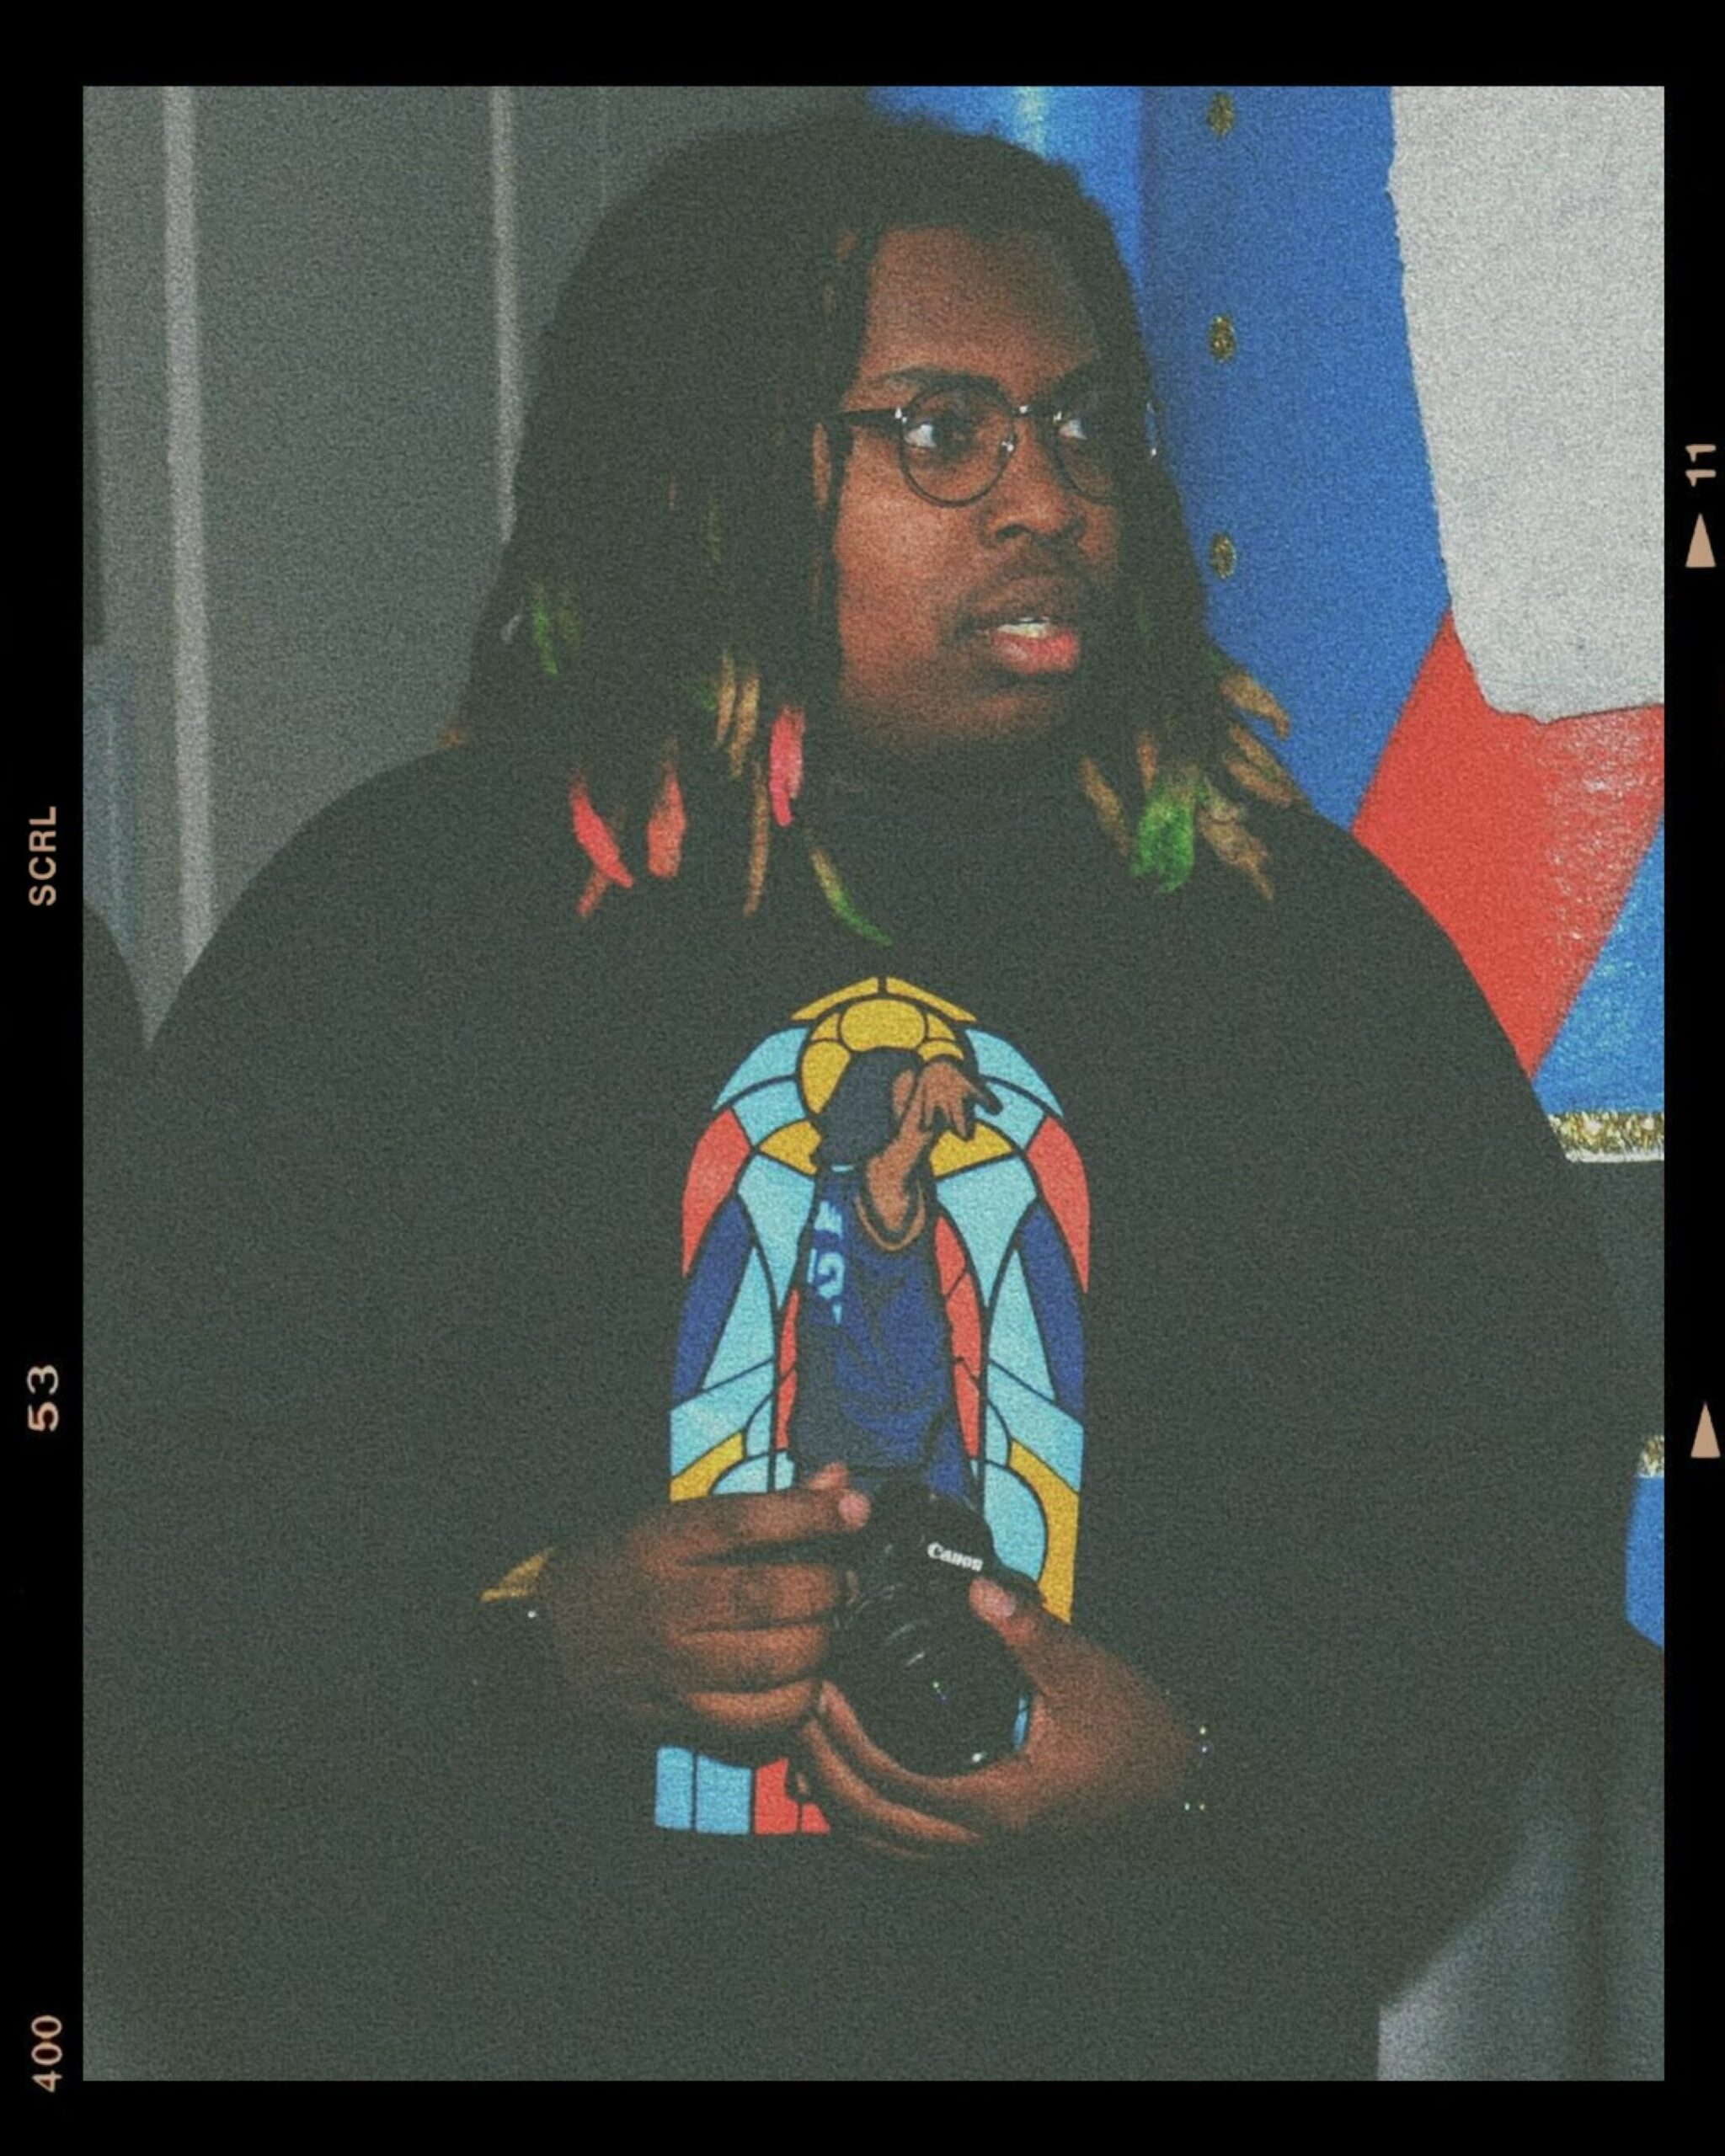 Young man with dreadlocks holding a camera, standing in front of a colorful abstract painting at the Riverbeat Festival, photographed with a vintage filter.